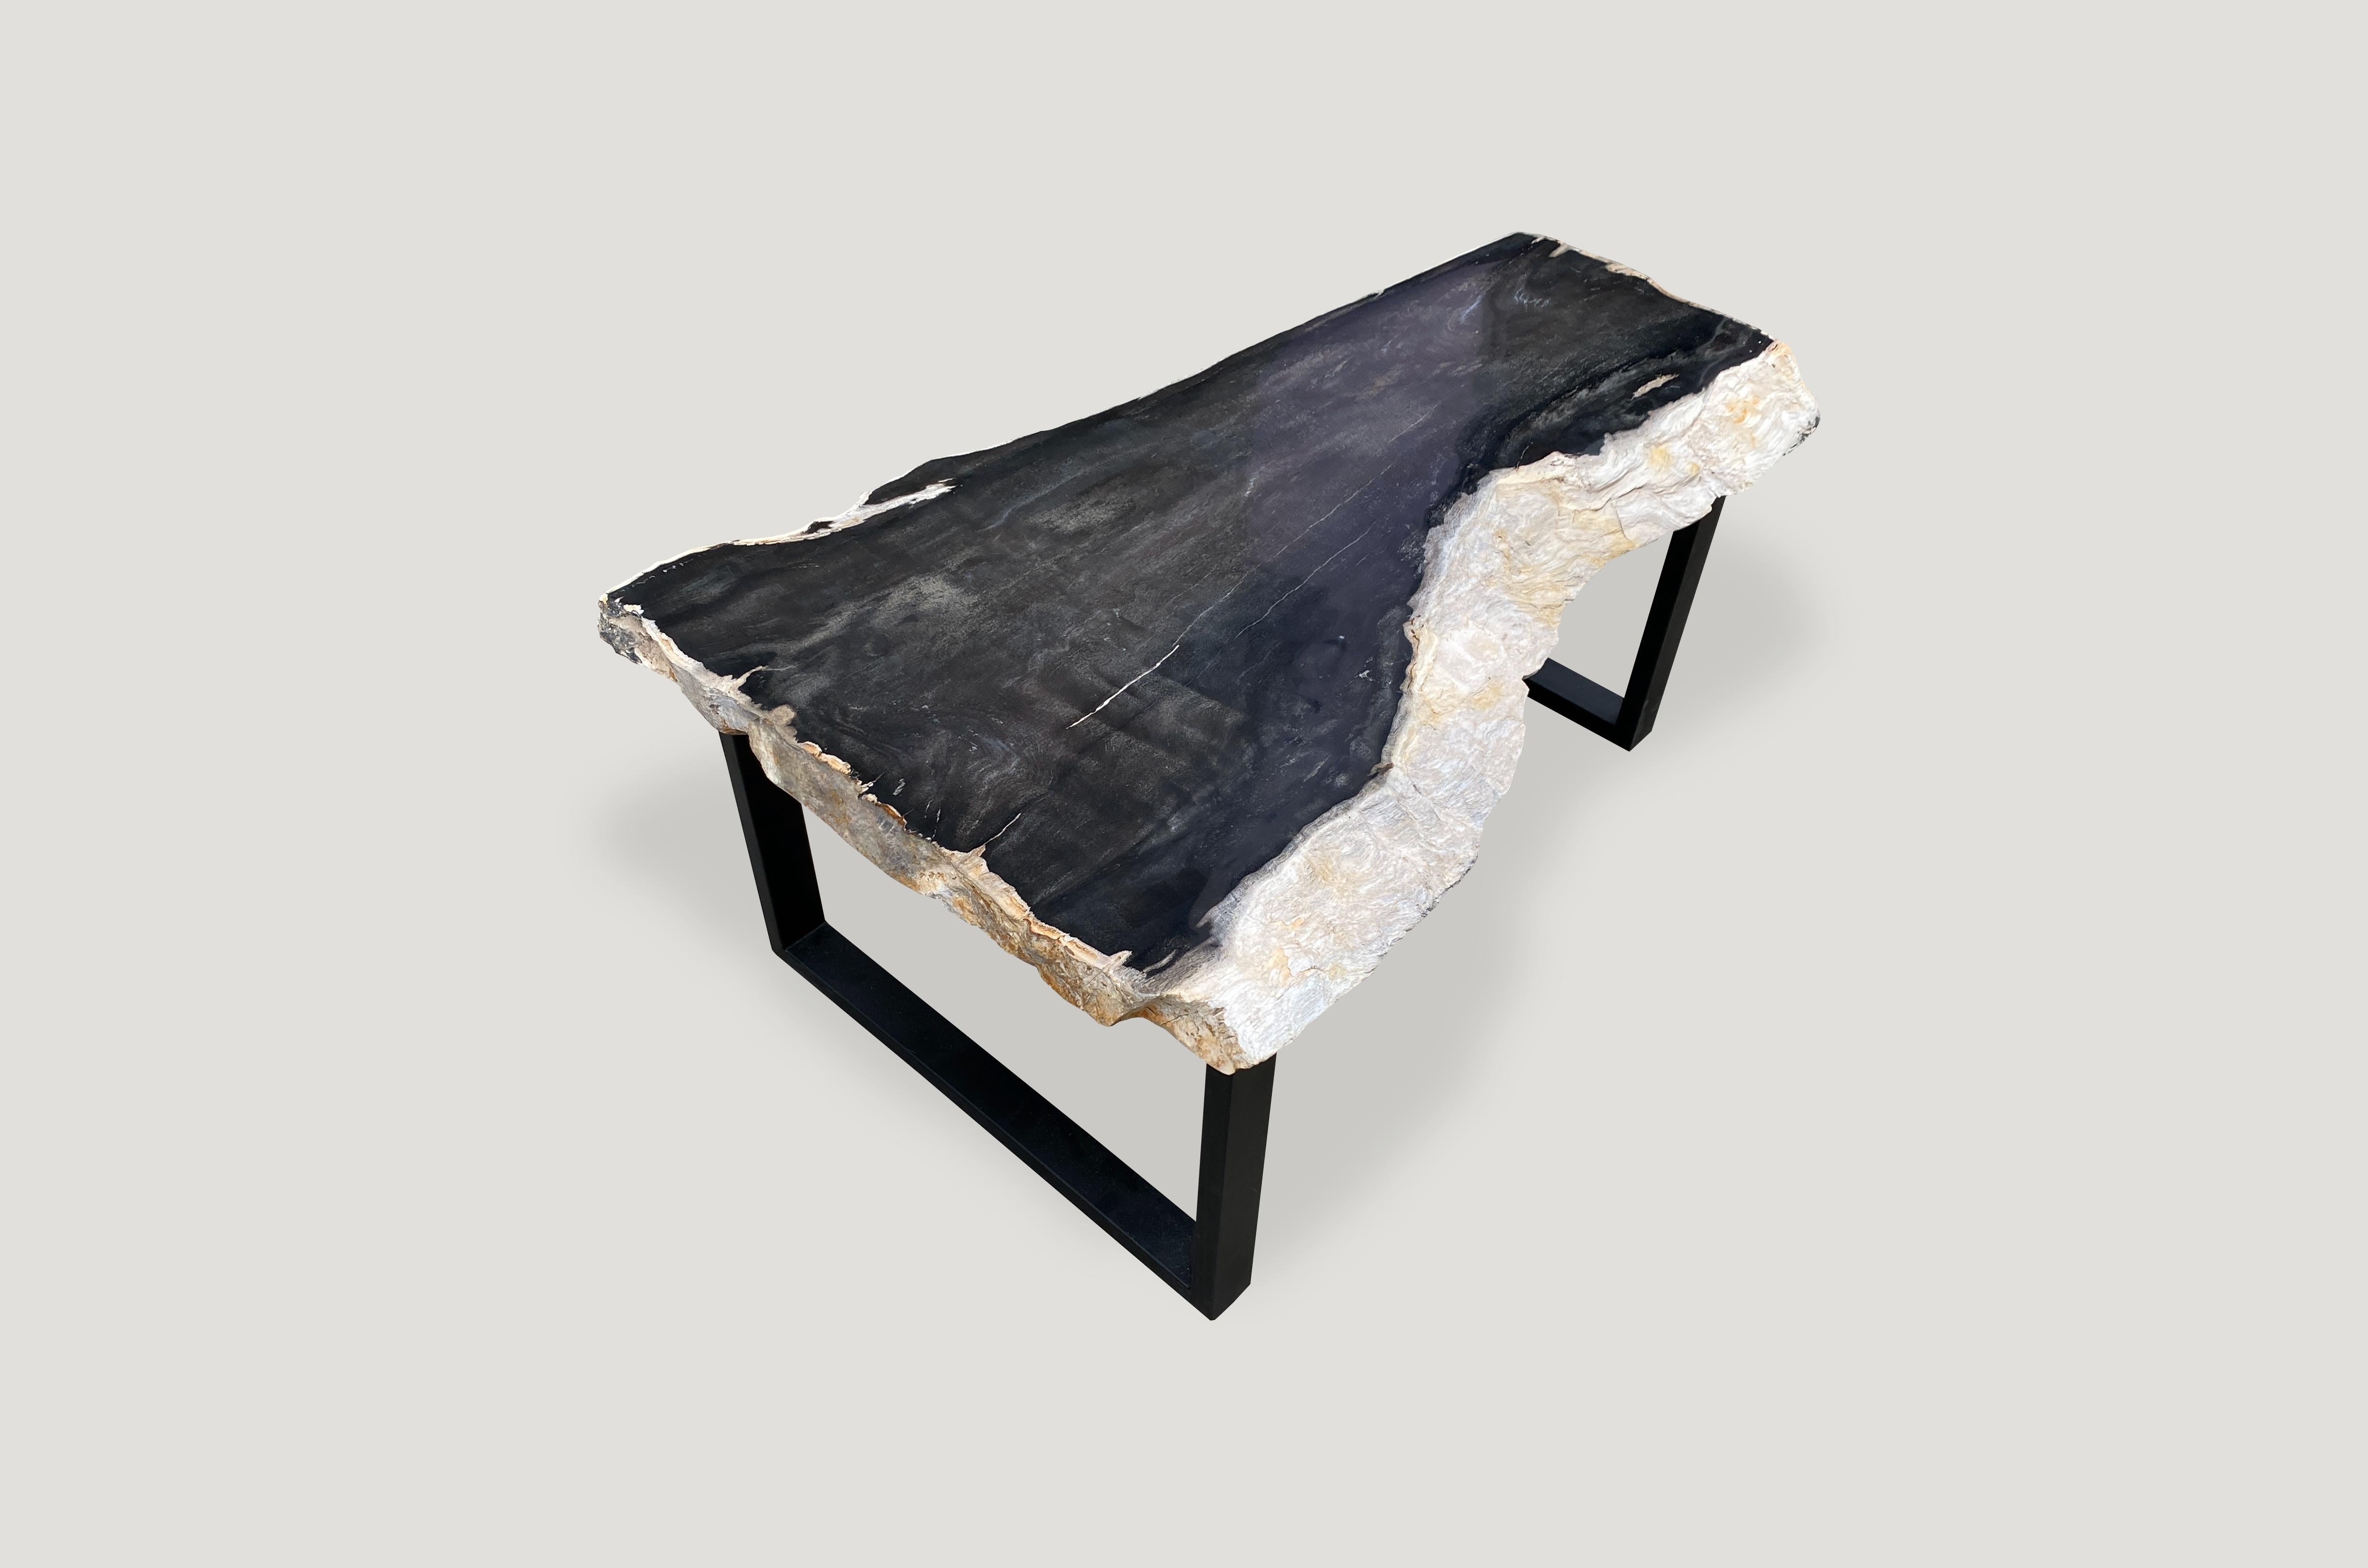 Rare, hard to find black and white tones on this super smooth, high quality petrified wood coffee table. We polished the two inch top smooth like glass and left the white sides raw in contrast. Set on a black metal base. The last two images are